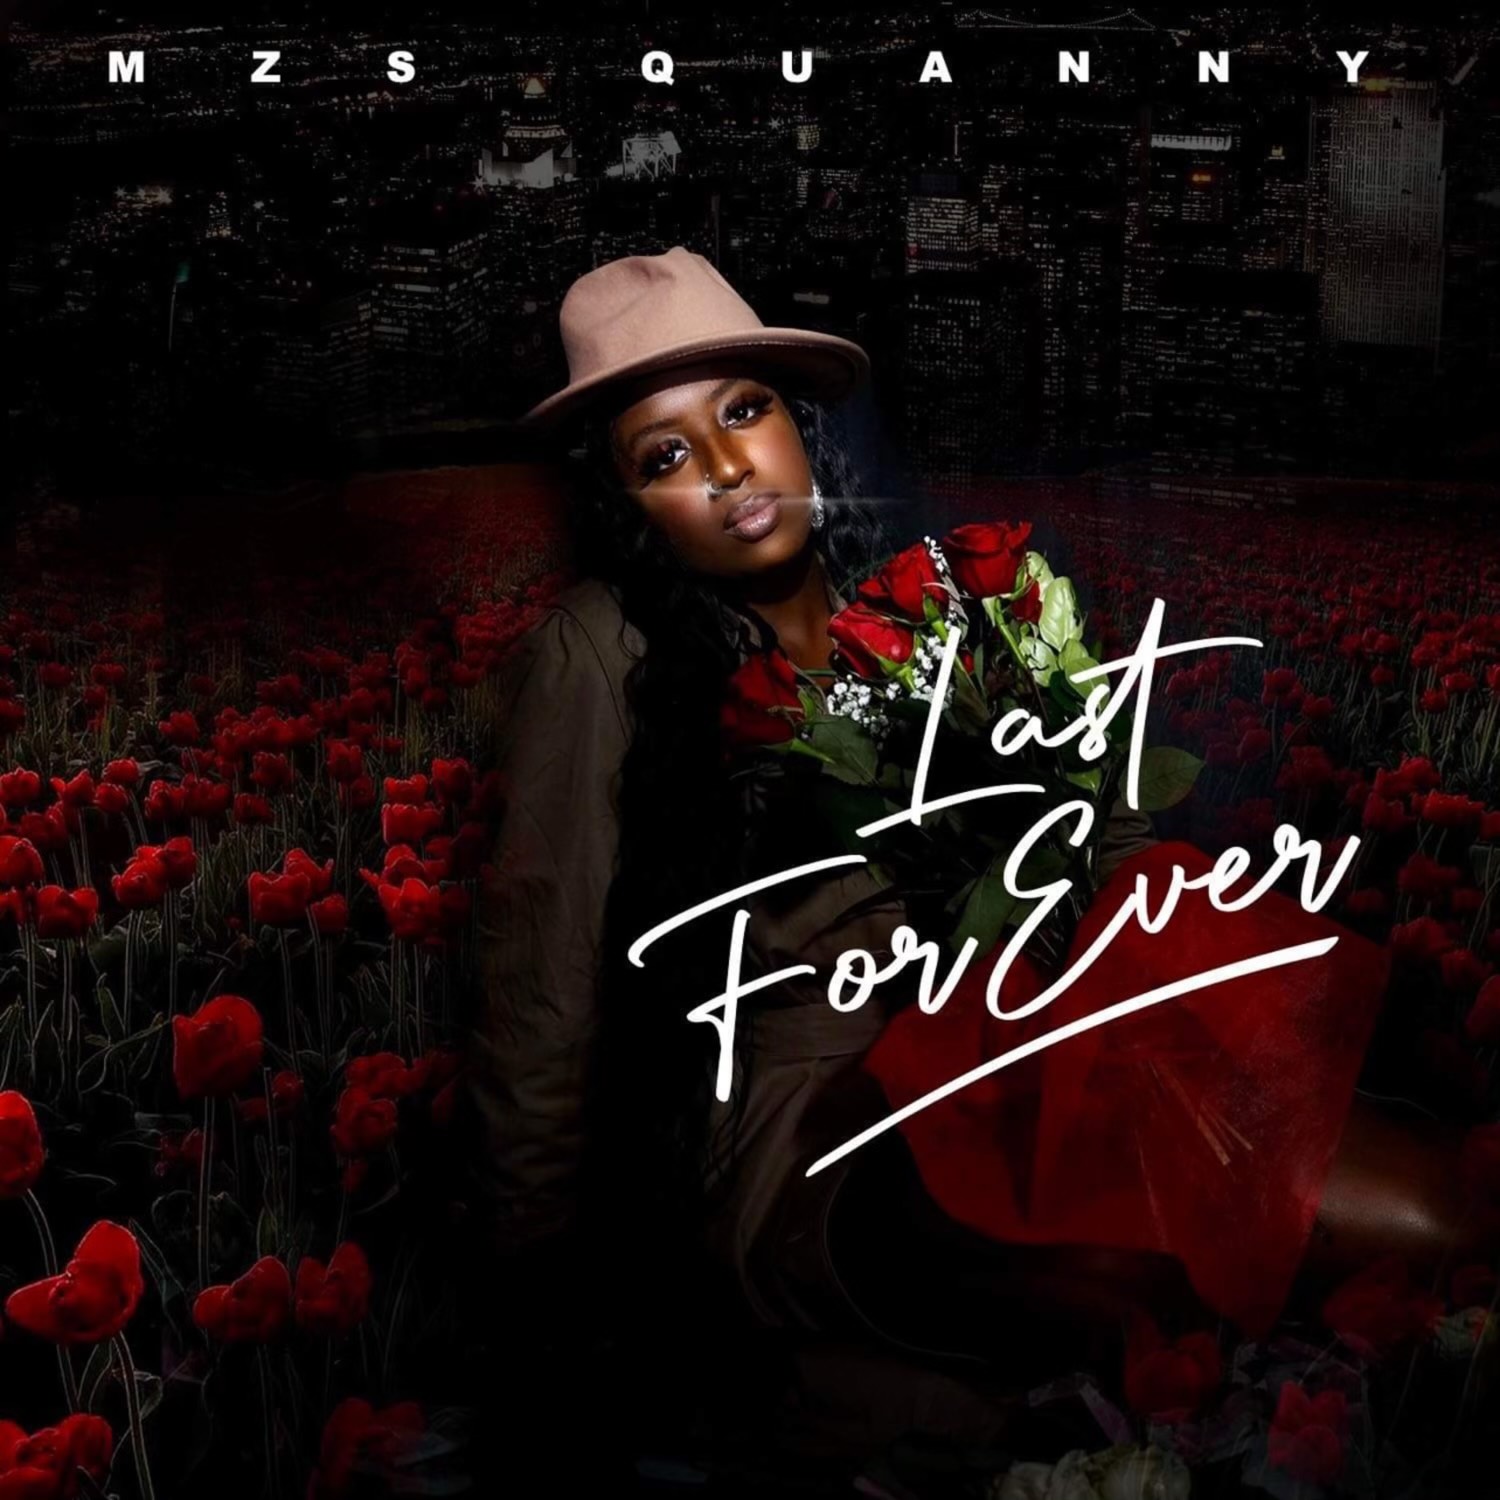 Mzs Quanny’s Pisces Personality Shines Through in ‘Last Forever”